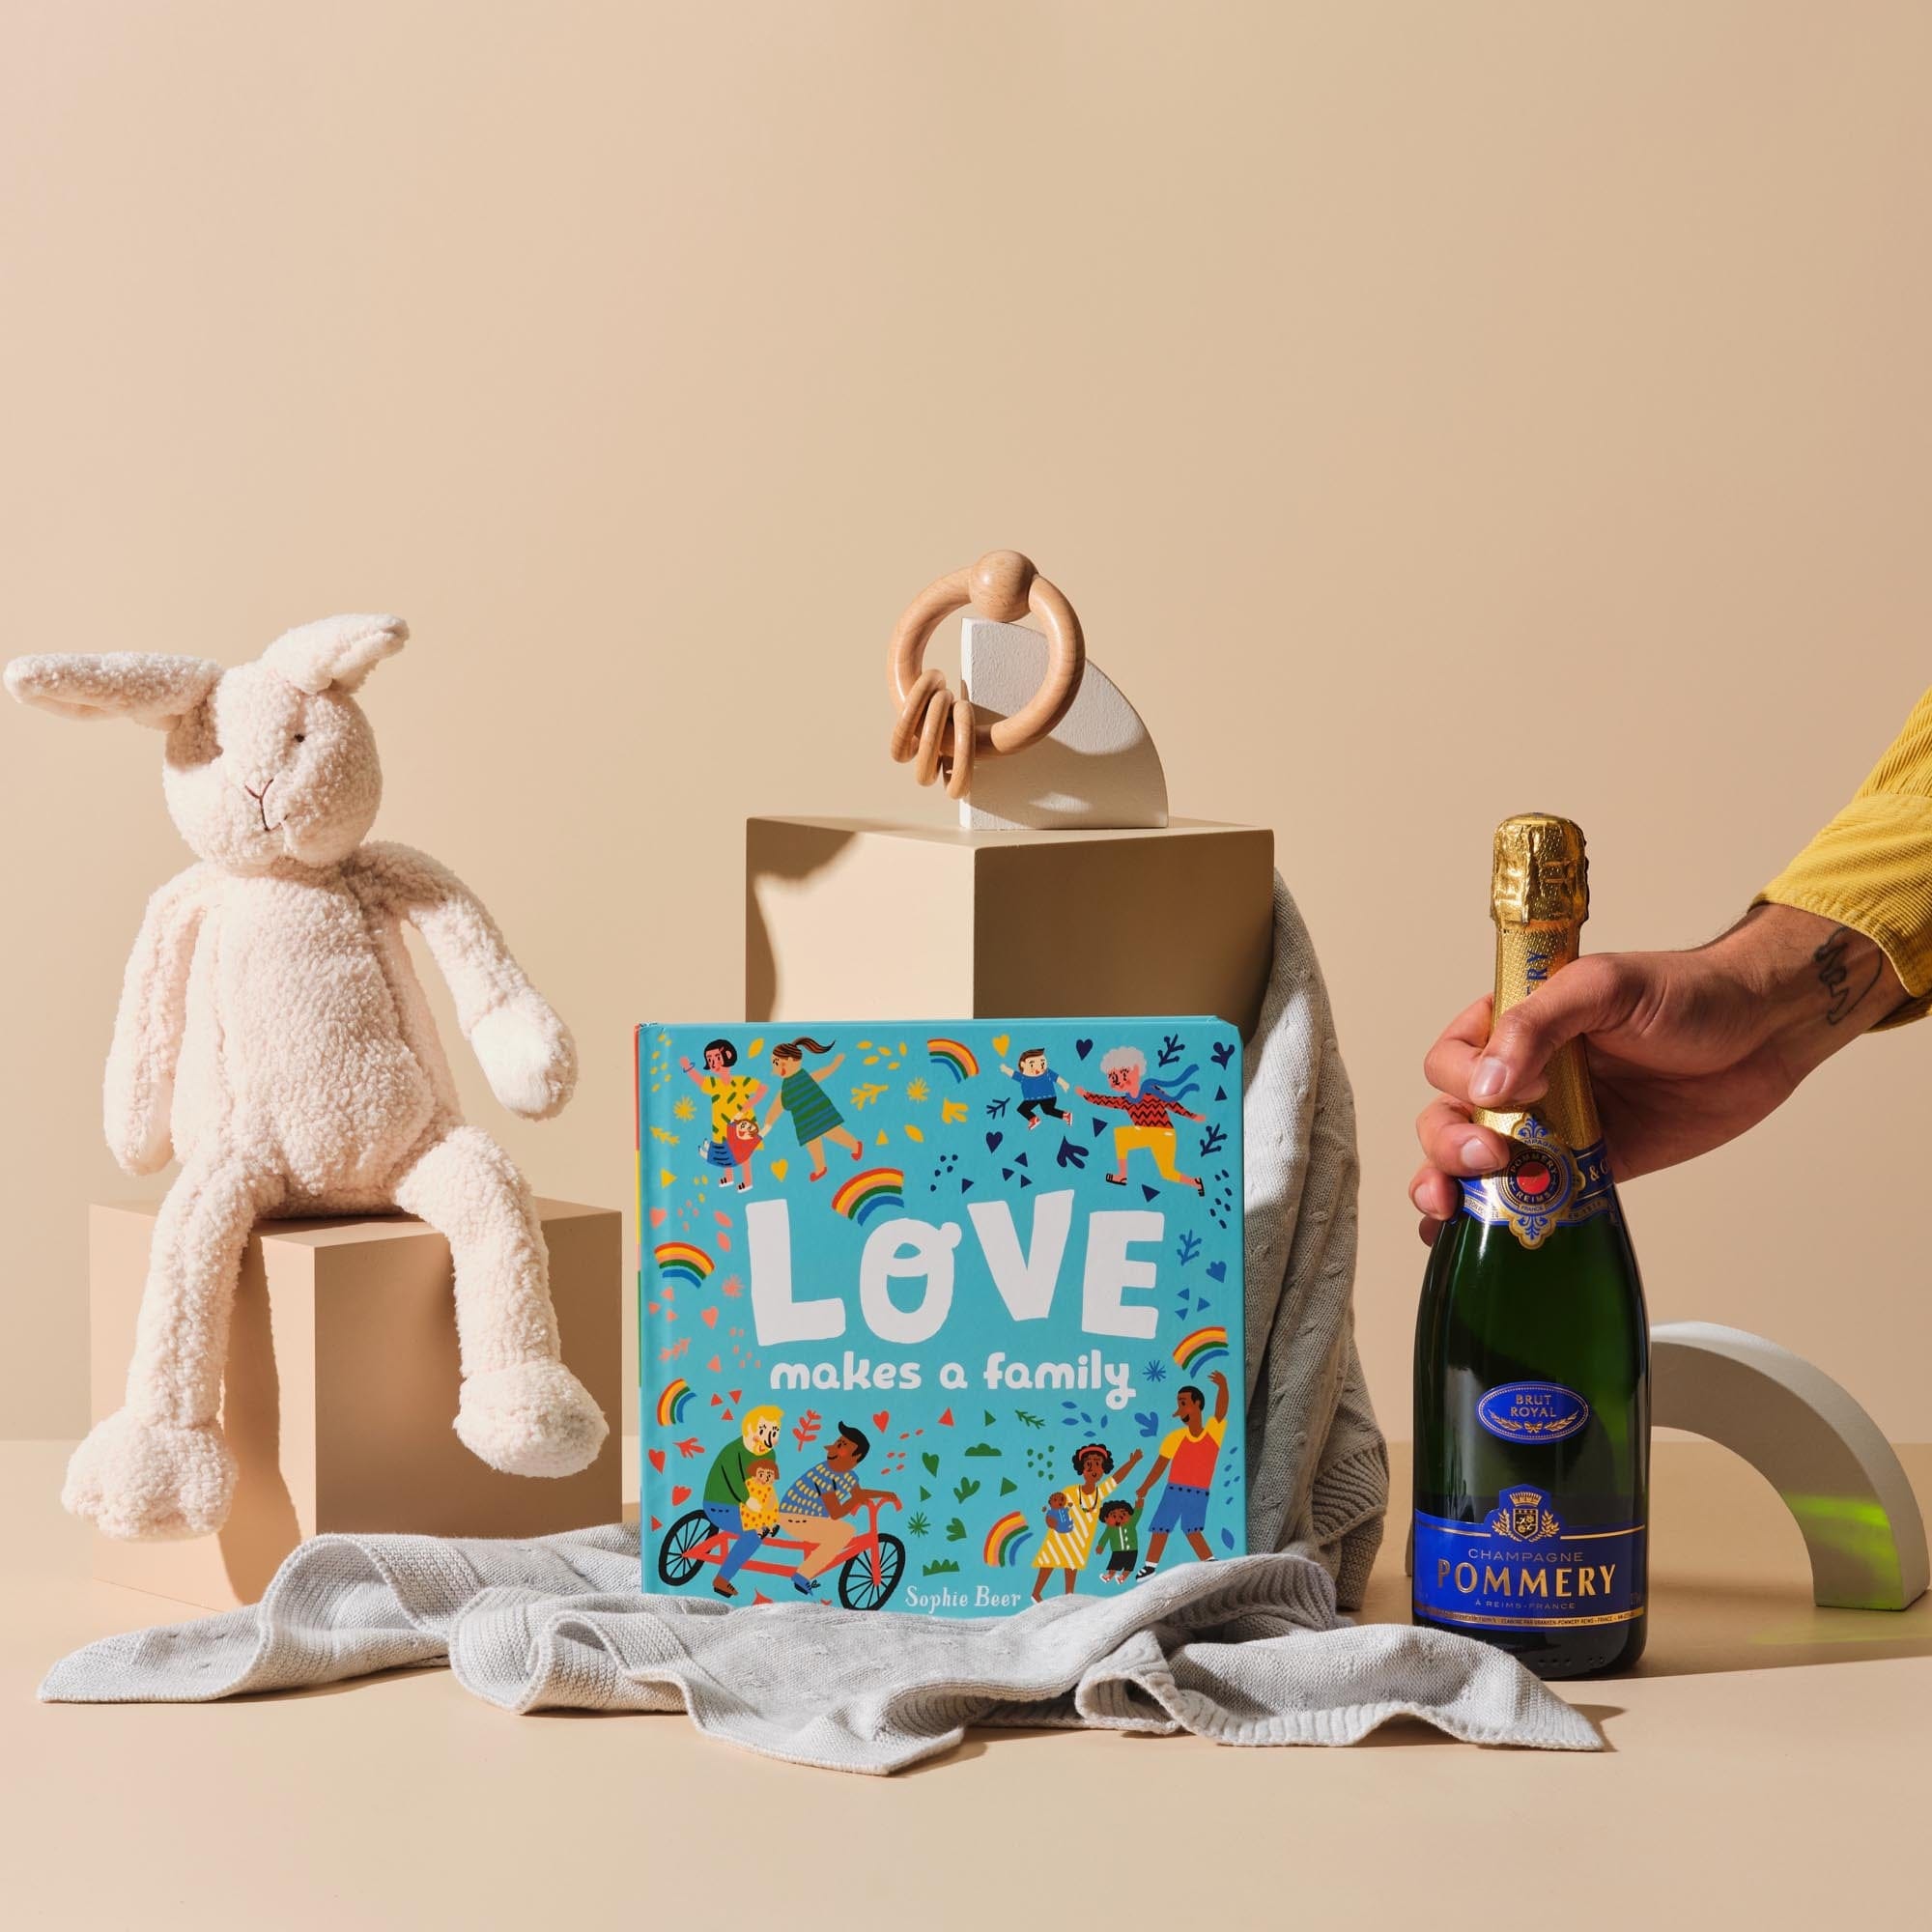 This is the Champagne Baby Showers gift bundle from Handsel. The image displays Sophie Beer's Love Makes a Family, Purebaby Essentials Blanket and Teething Ring, Bonnie the Bunny Toy and Champagne Pommery Brut Royal